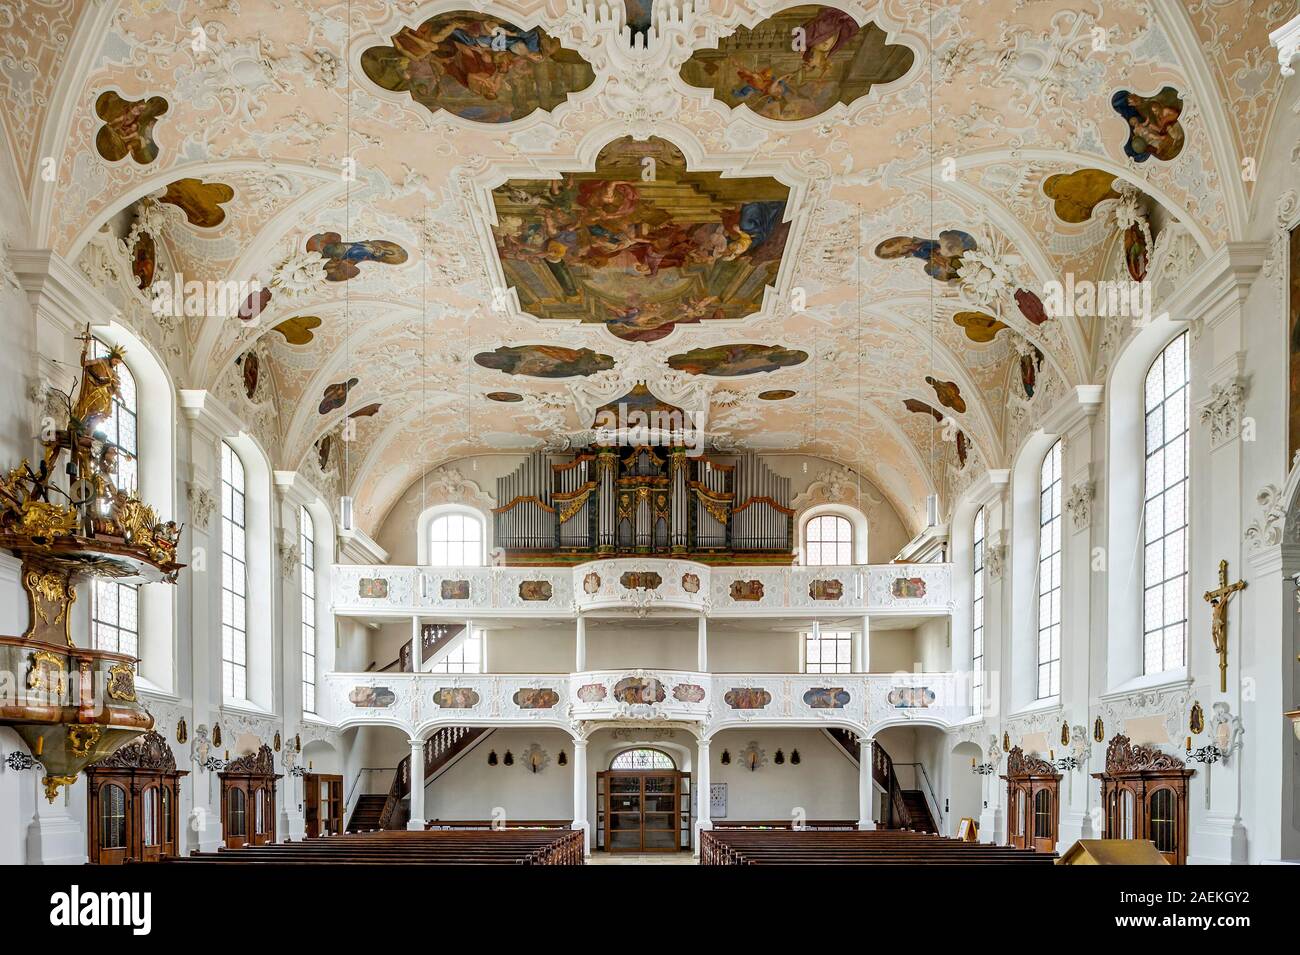 Baroque nave with organ gallery, mirror vault with ceiling frescoes, St. John the Baptist parish church, Old Town, Hilpoltstein, Middle Franconia Stock Photo